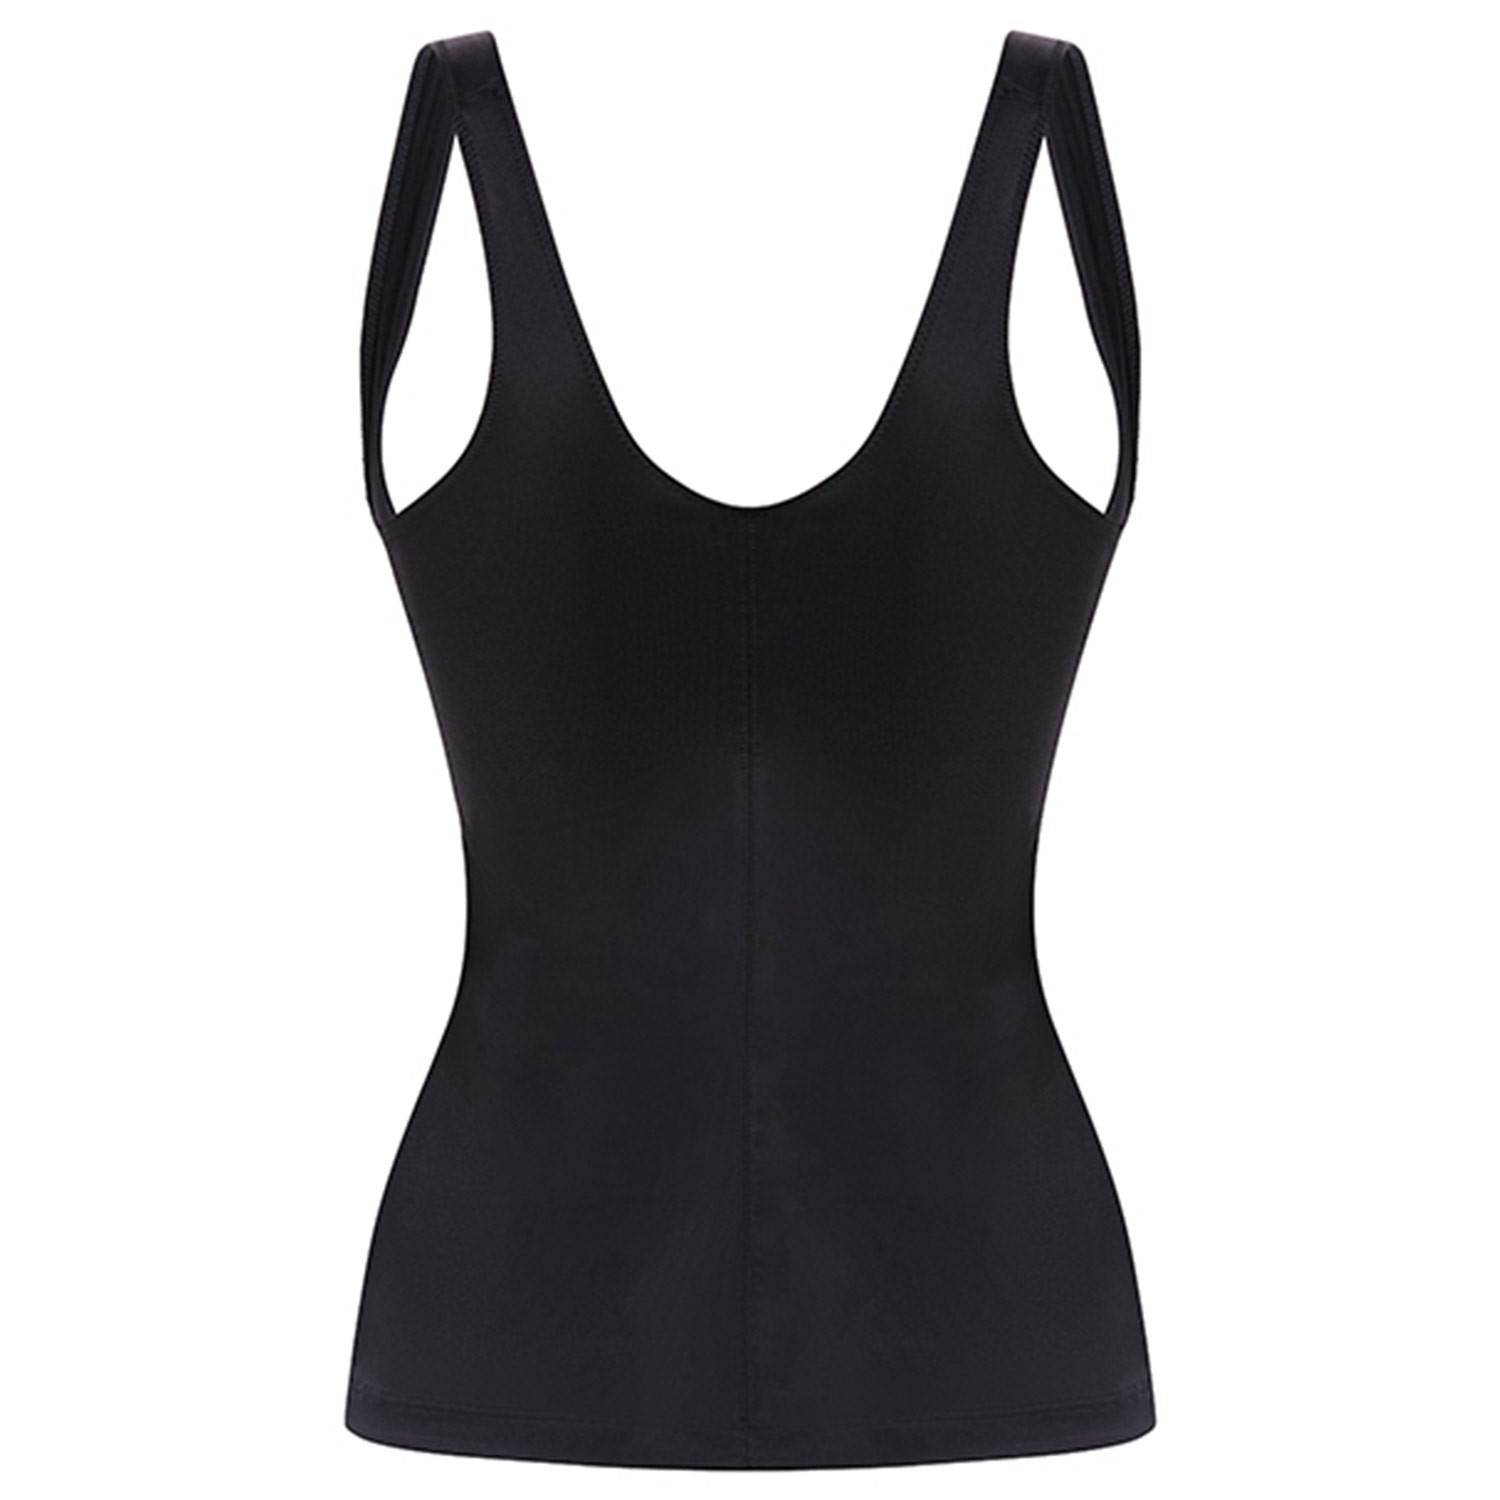 Felina Conturelle Soft Touch Shaping Body No Cups - Body - Shapewear -  Underwear - Timarco.co.uk